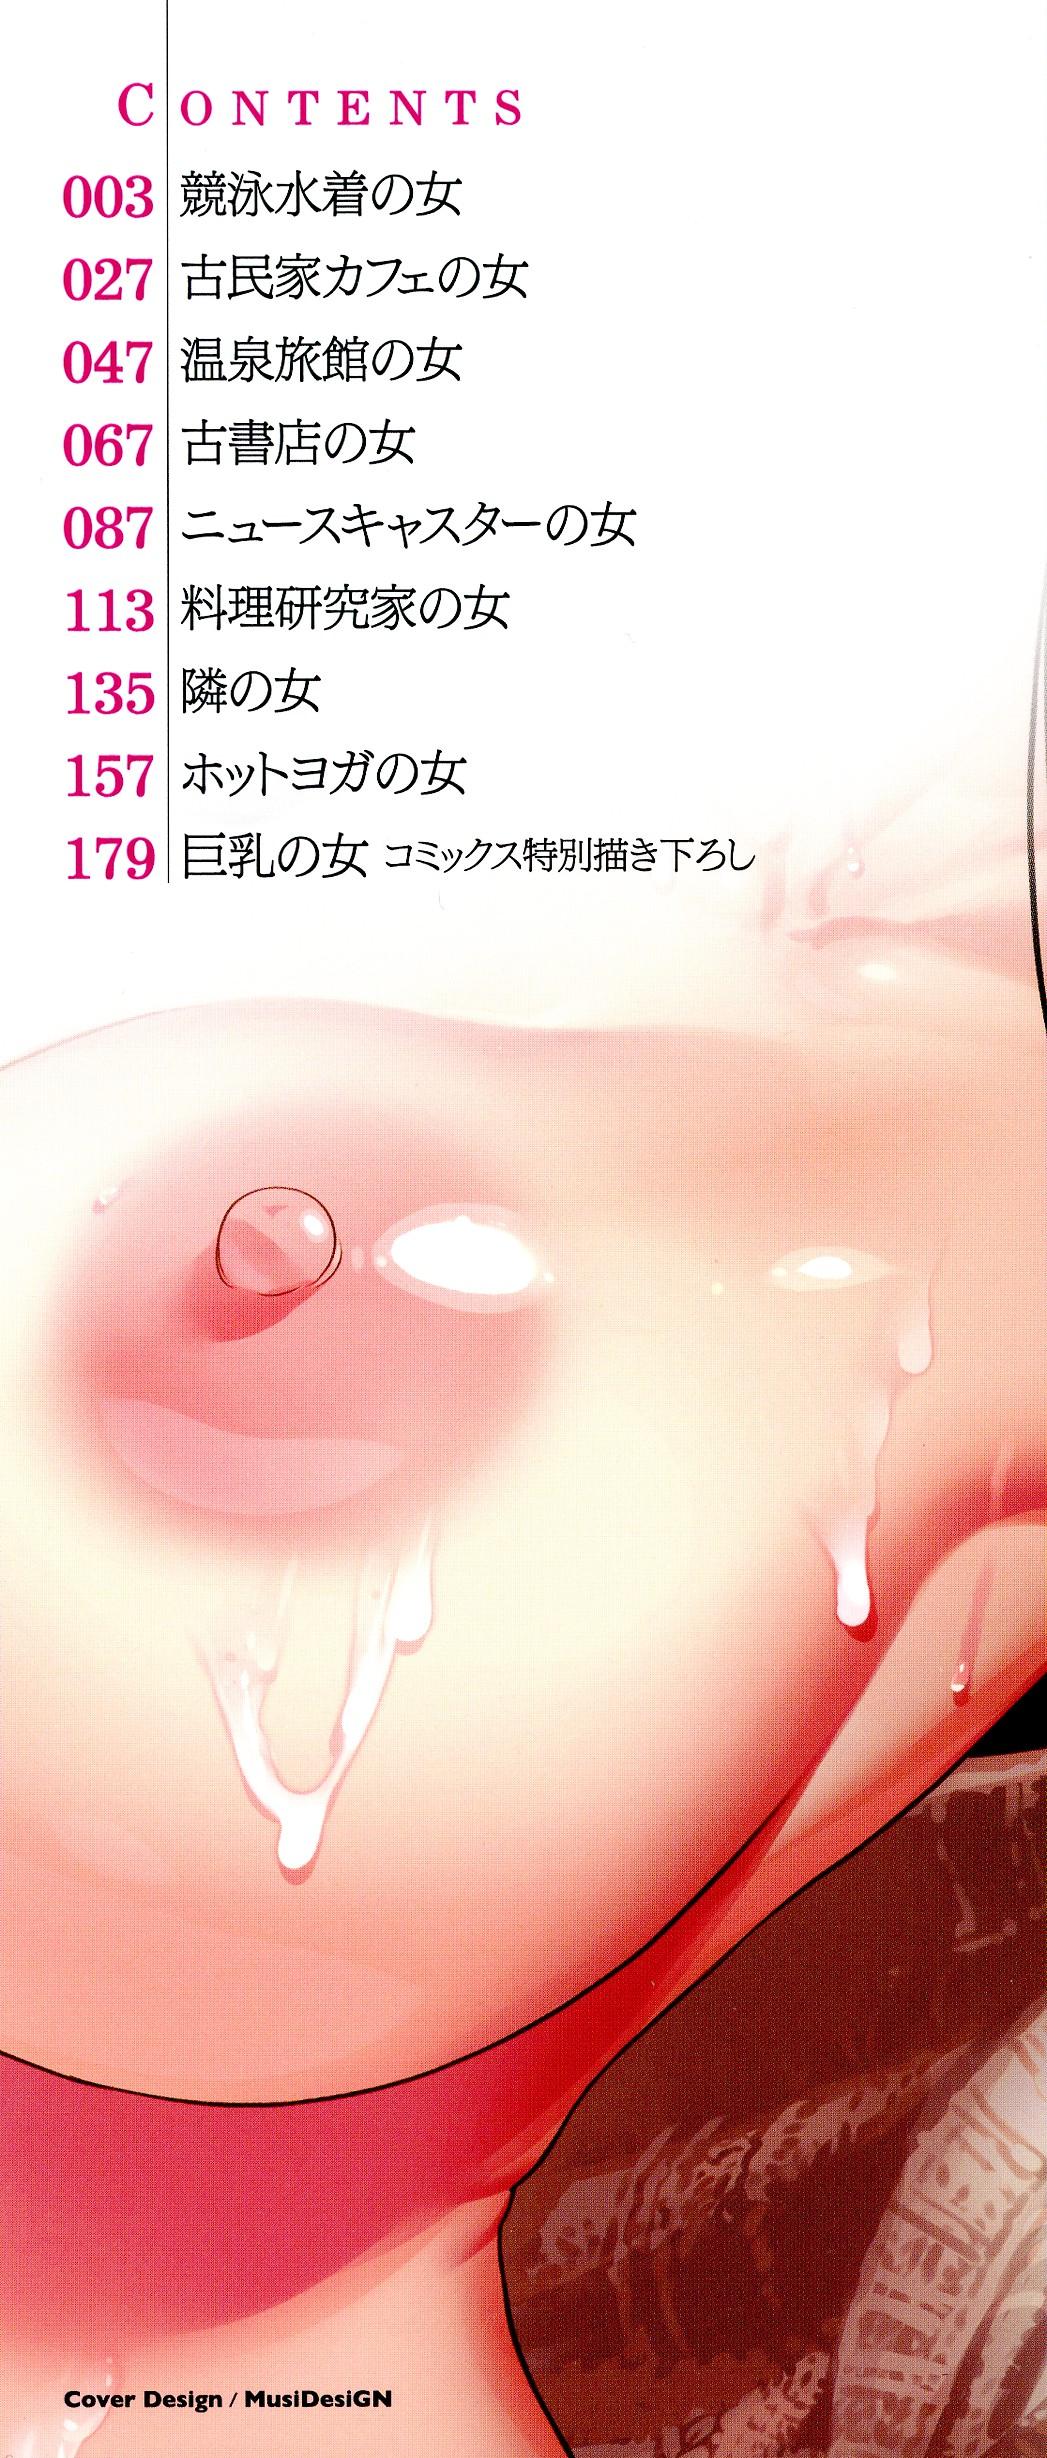 Classic Anata ga Itte mo Owaranai - When you ejaculate, it doesn't end Amateurs Gone Wild - Page 3